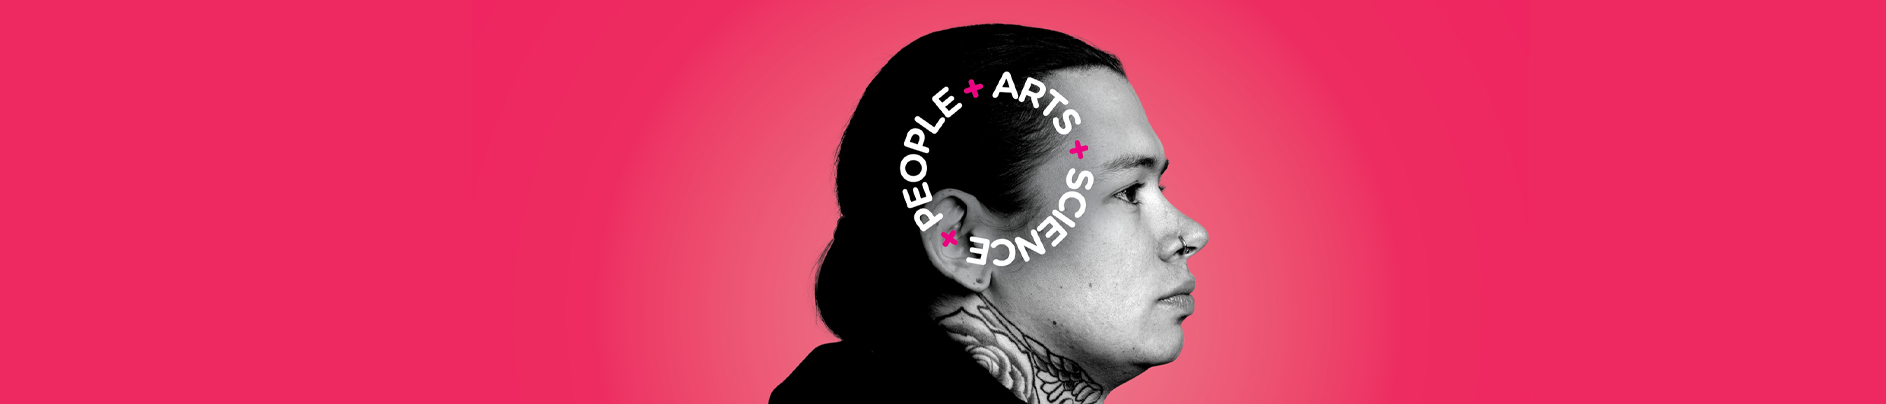 Persons head on a pink background. The words "People, Arts, Science" are around them.